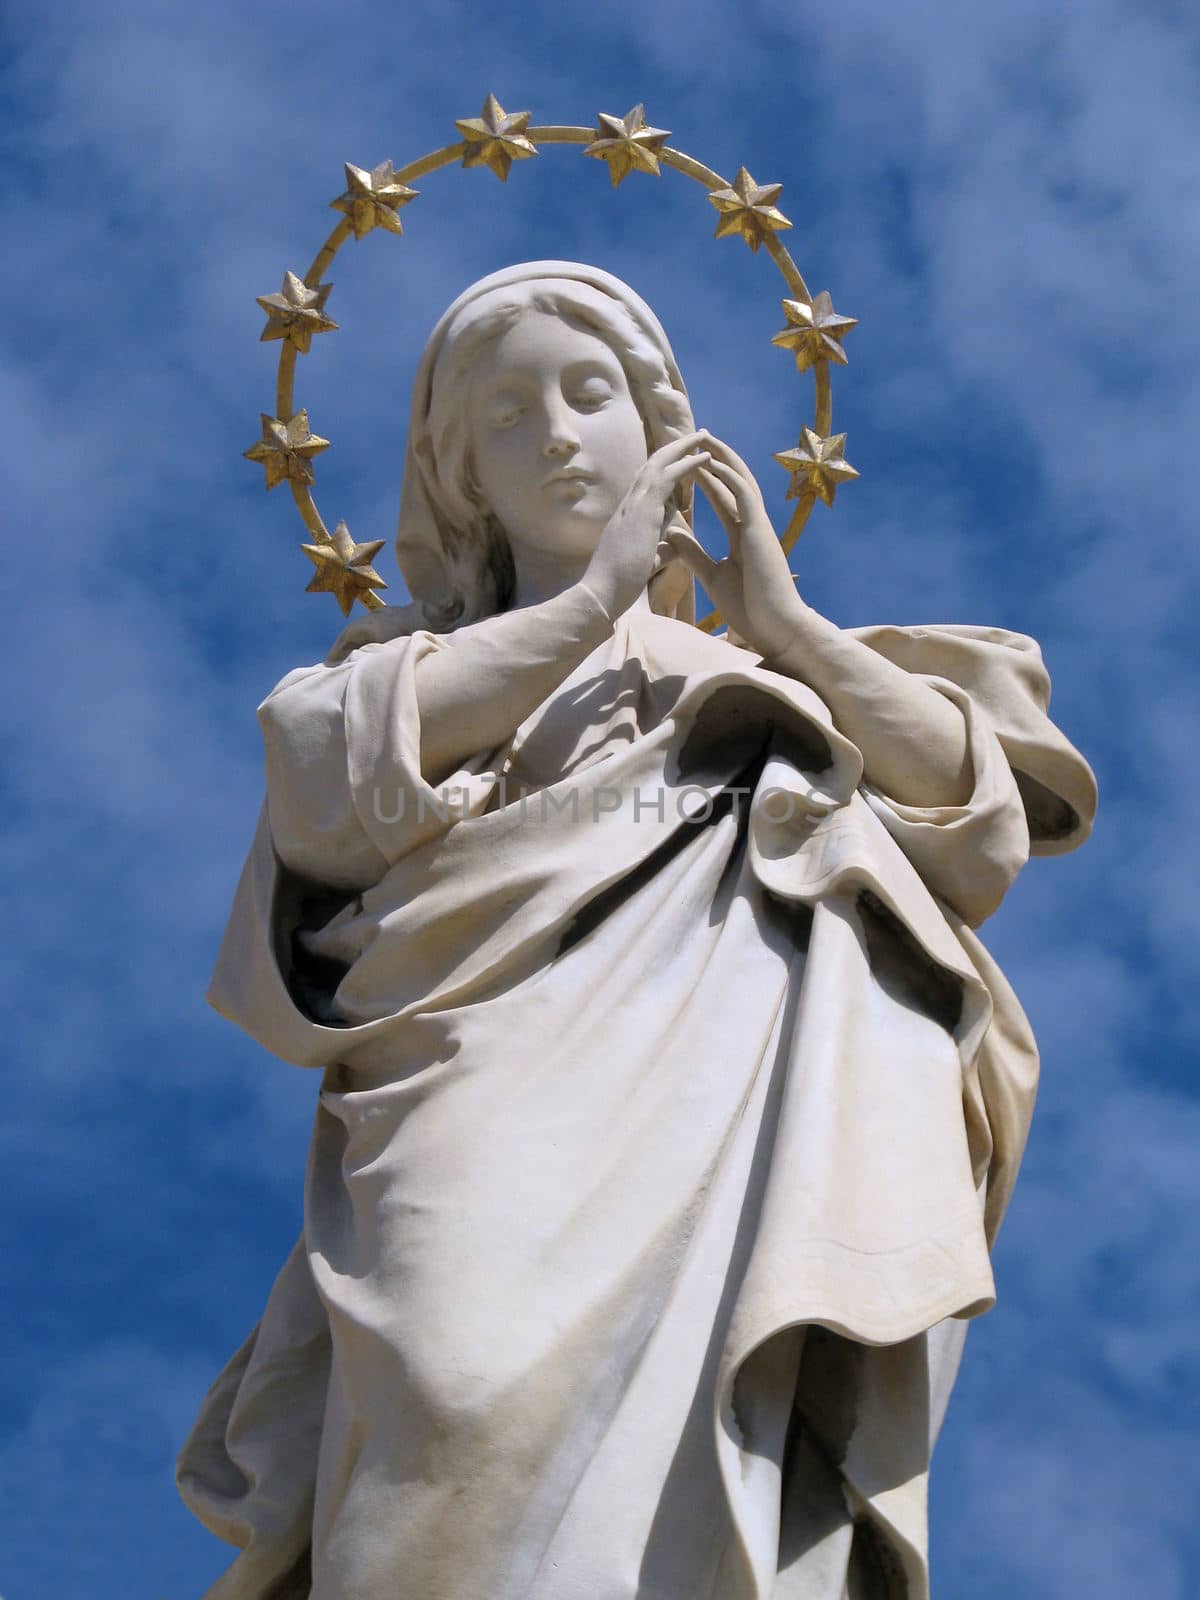 A marble statue of The Immaculate Conception in Cospicua - Malta.